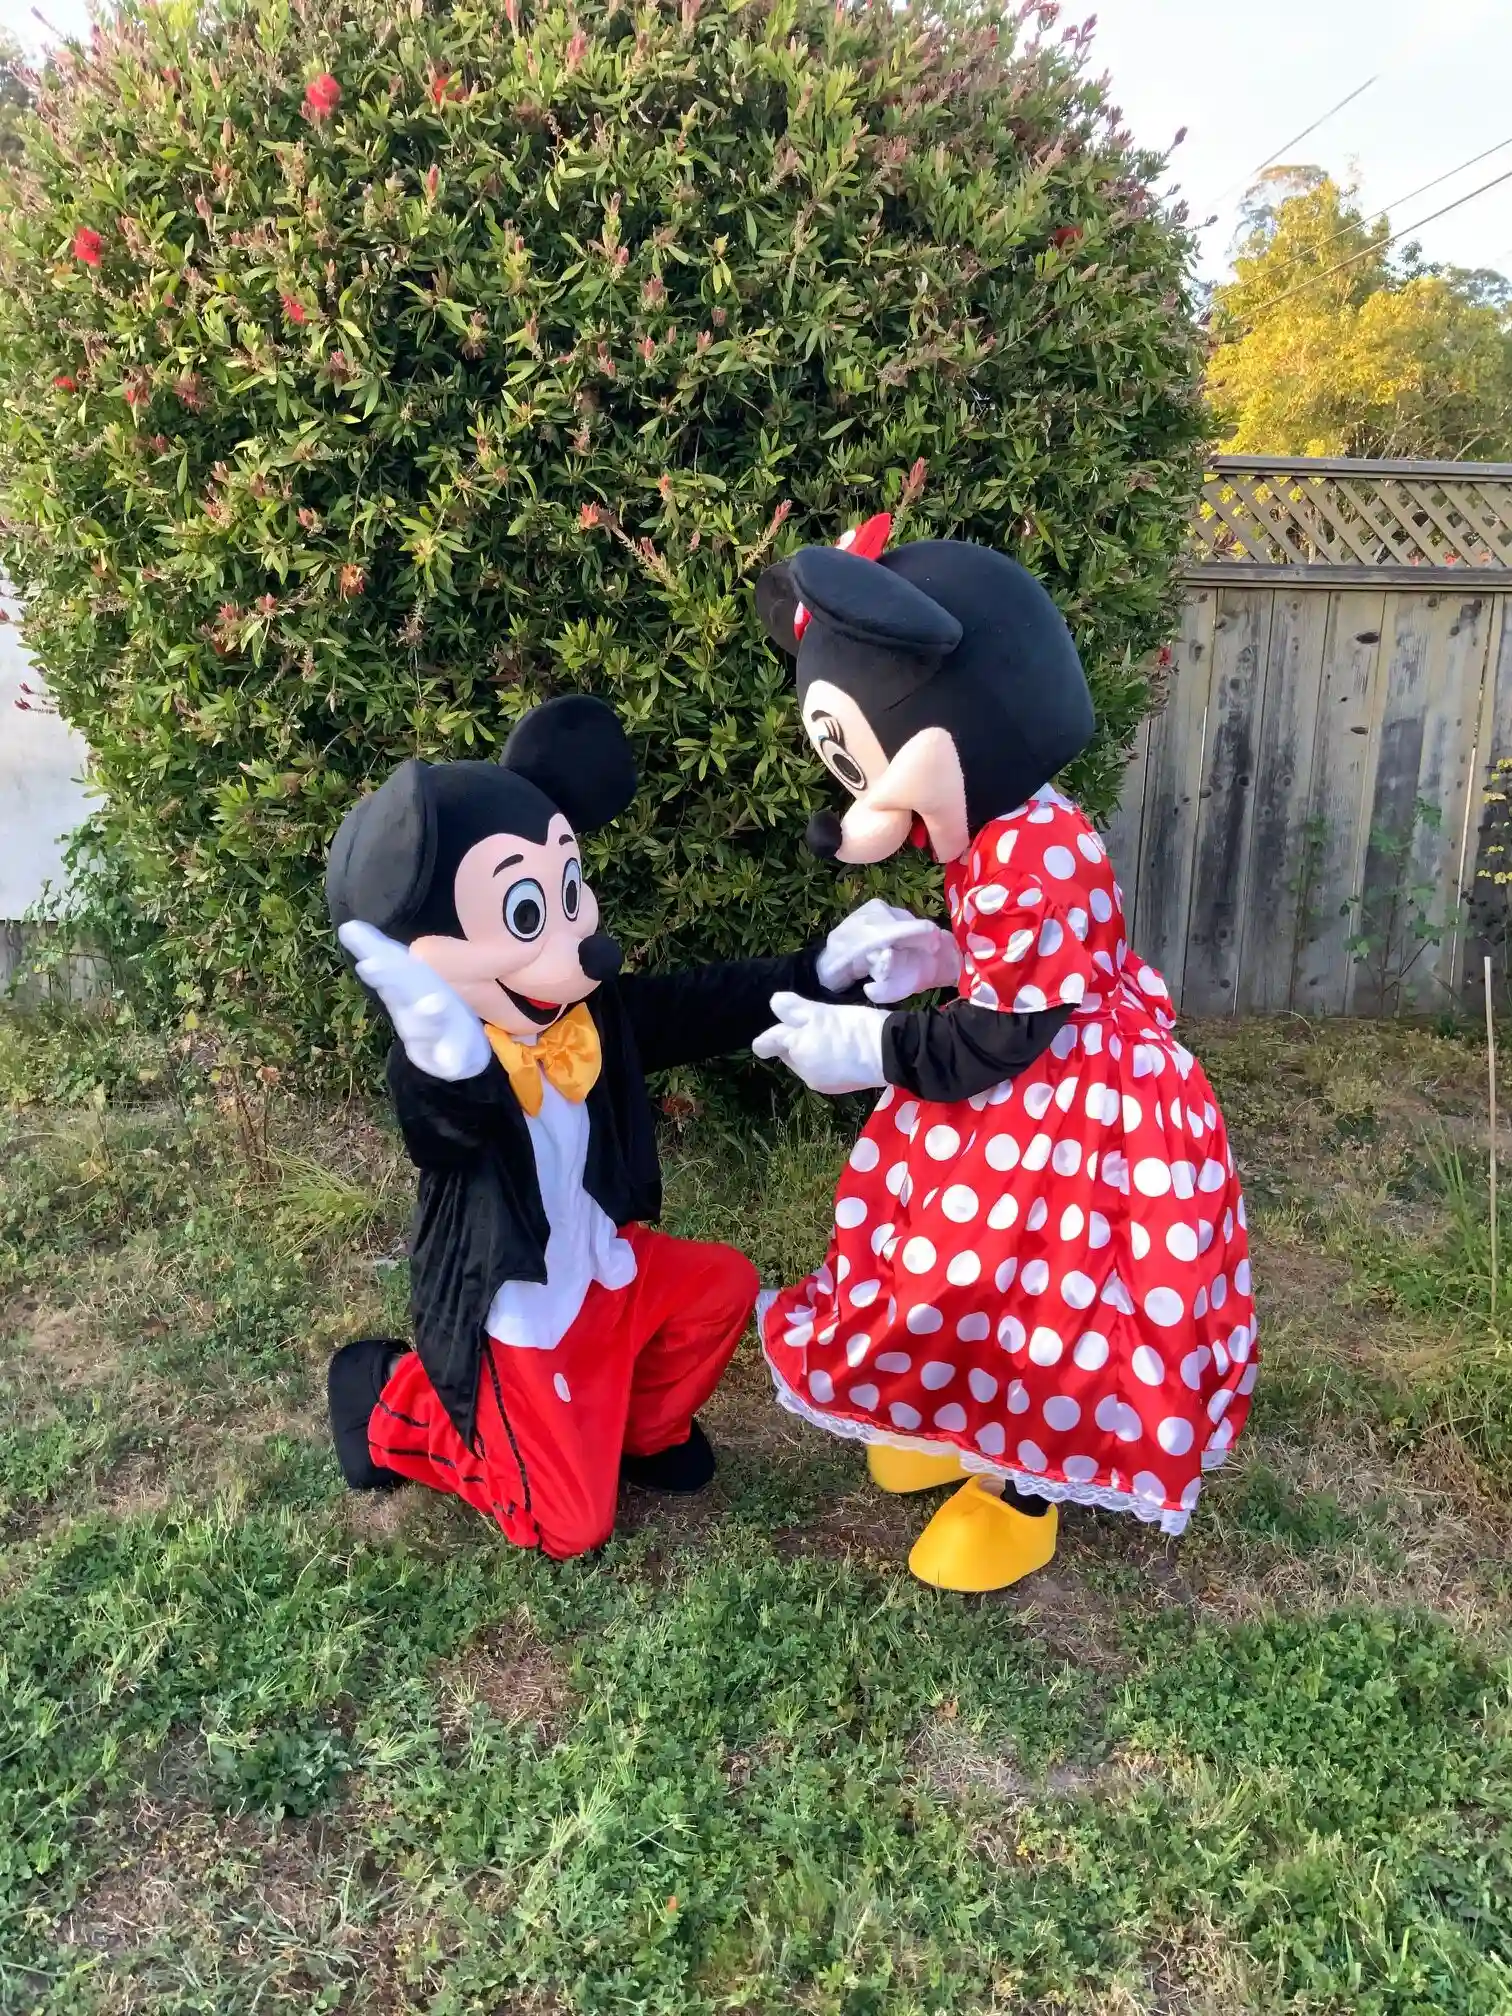 A Mickey and Minnie Mouse Costume